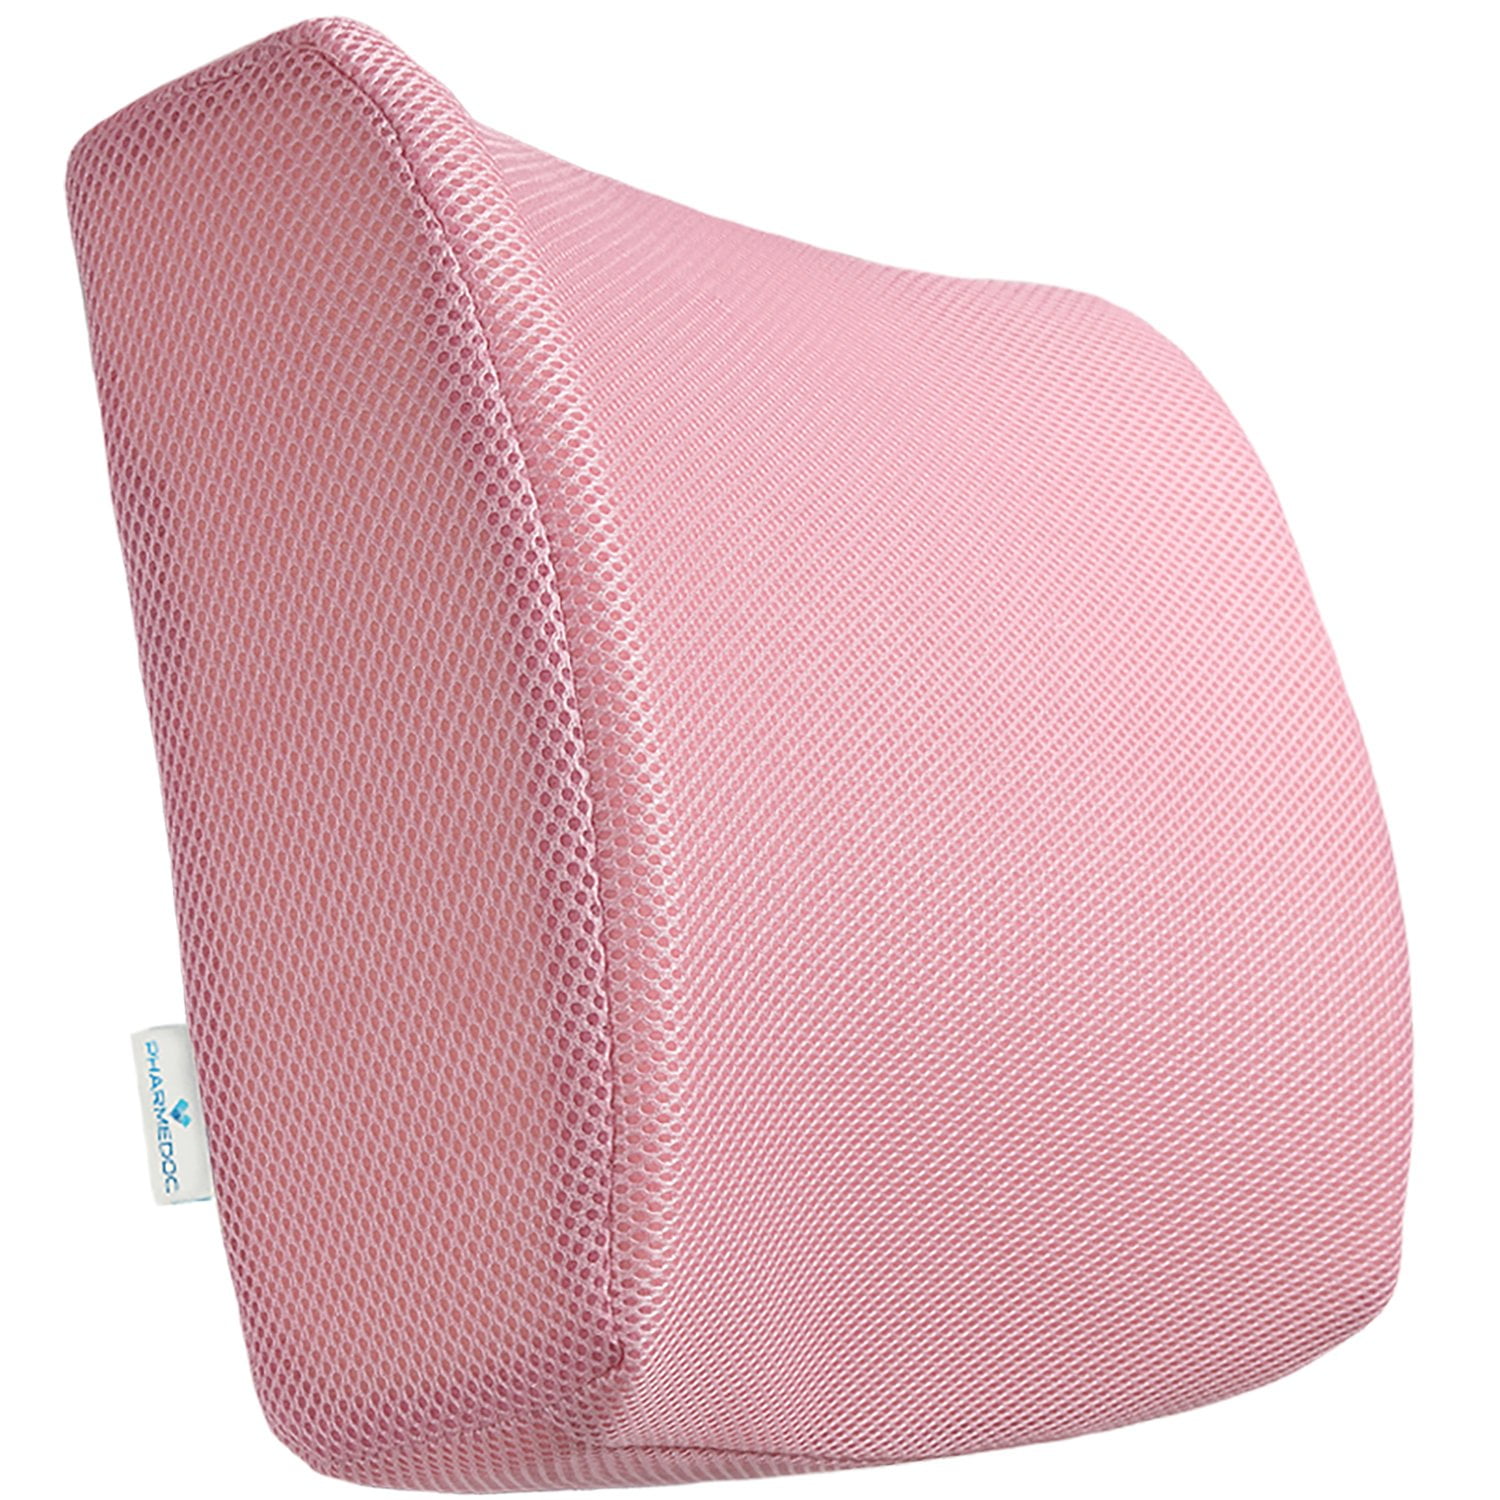 Orthopedic Lumbar Support Pillow for Office Chair and Car Seat